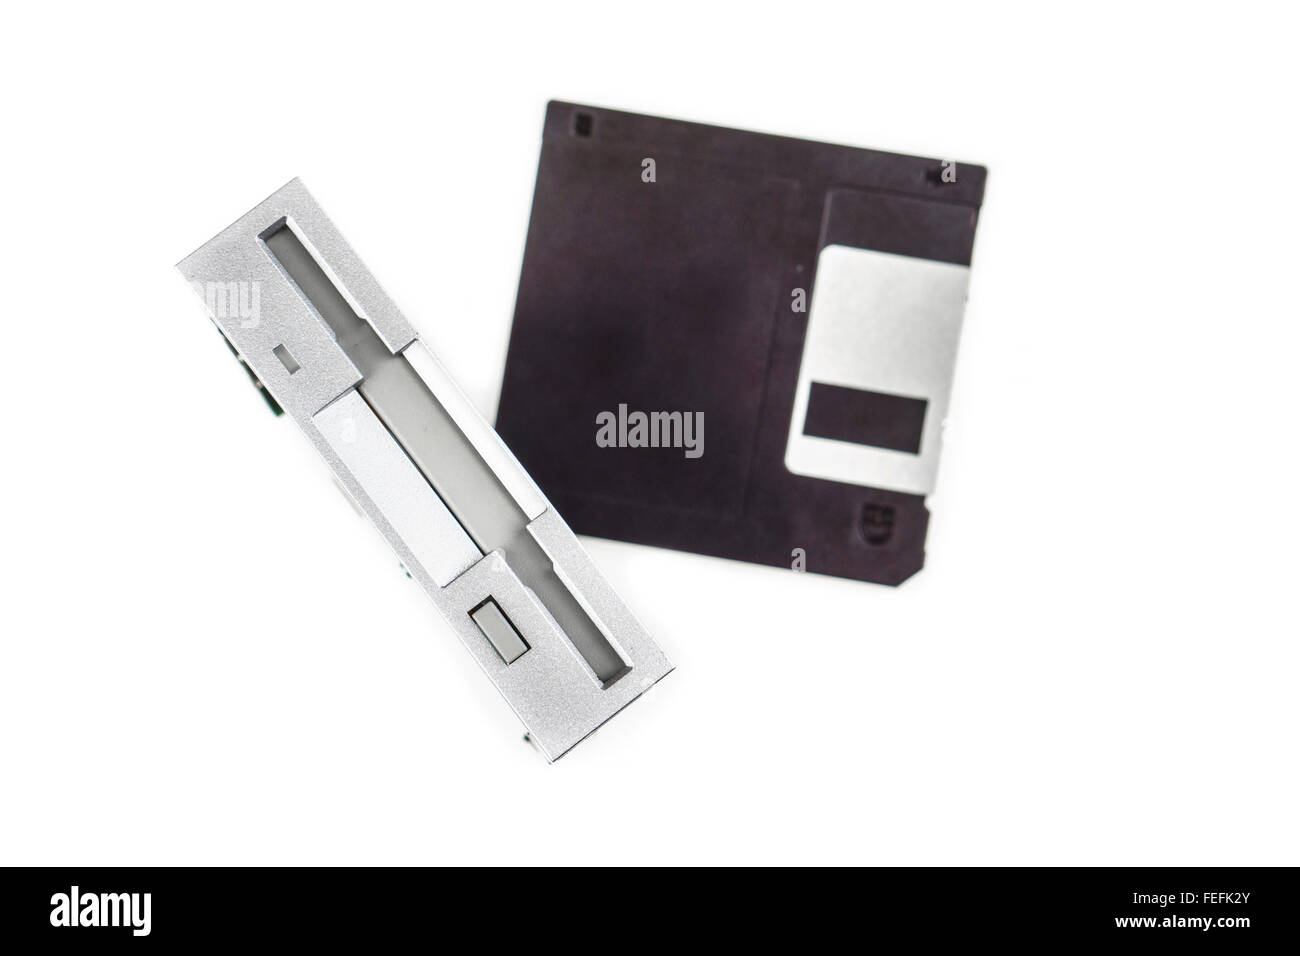 Floppy disk drive and diskette, white isolated 02 Stock Photo